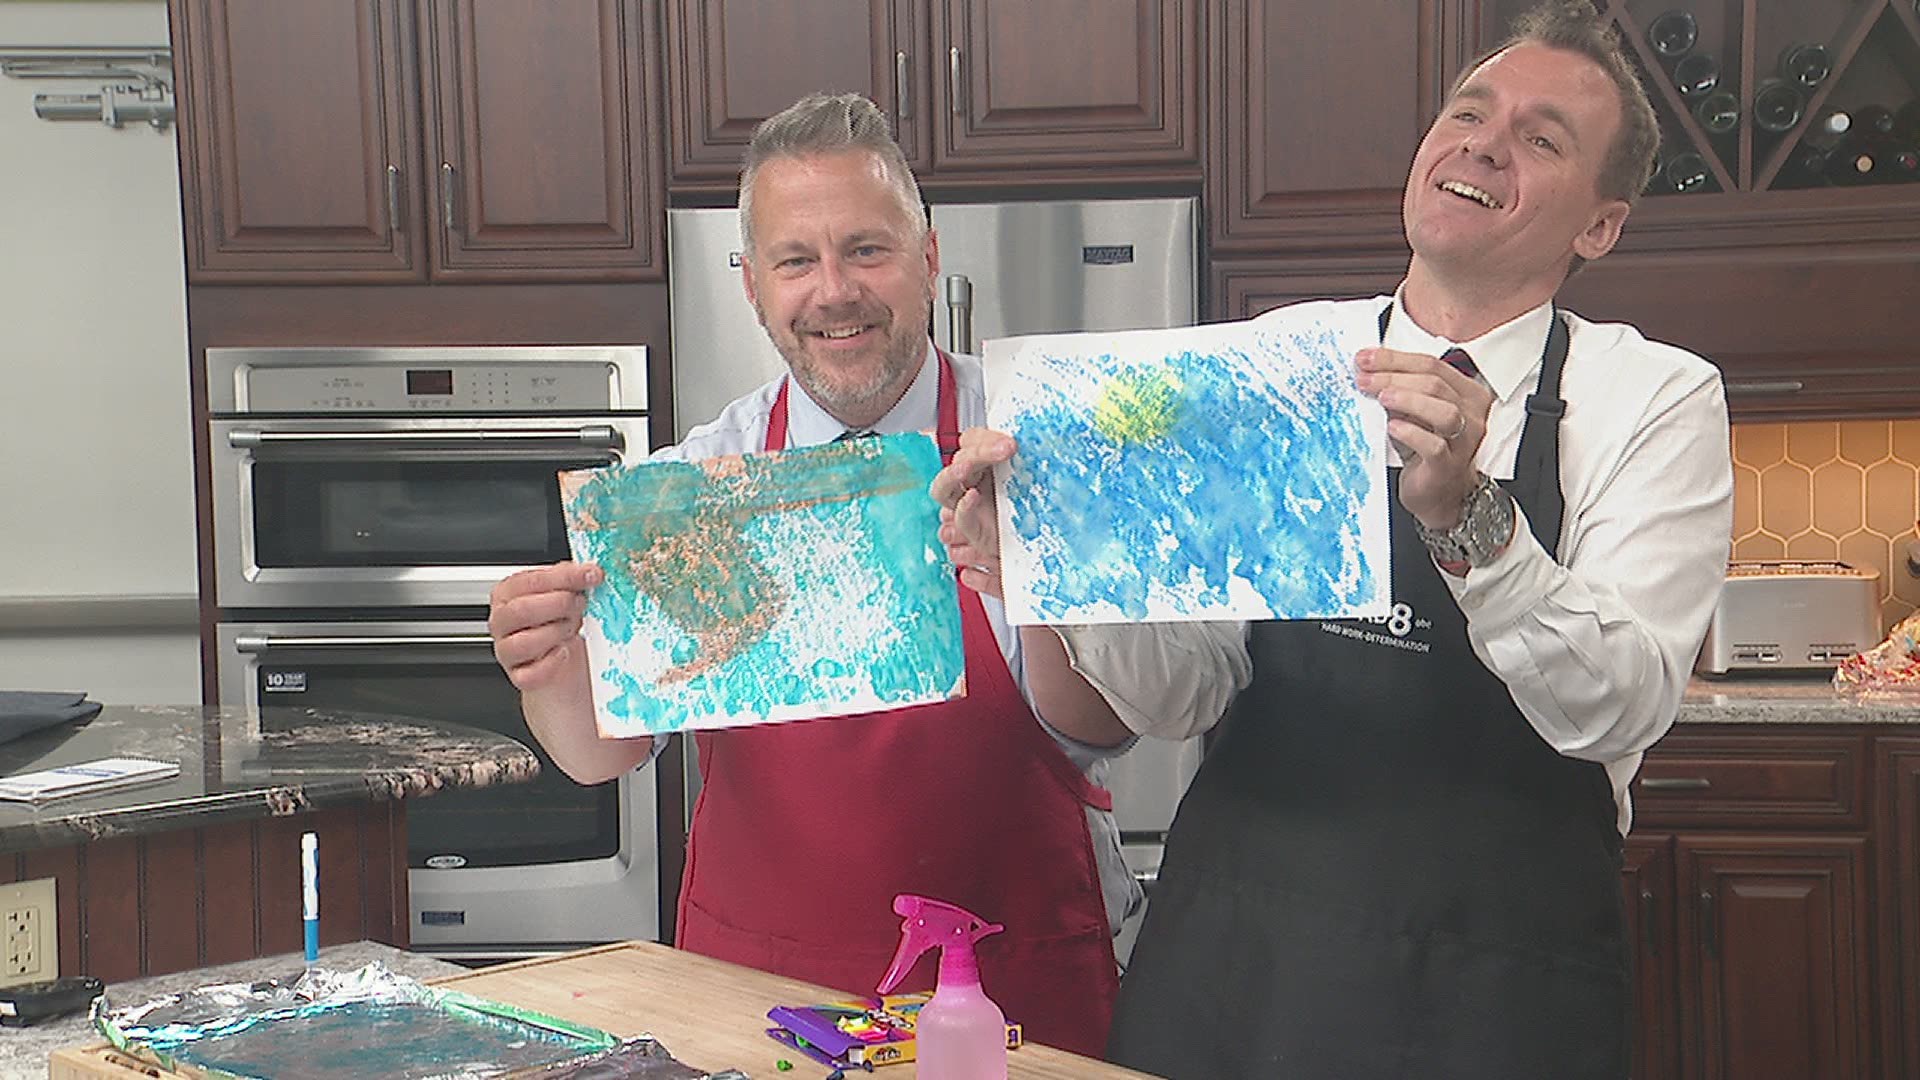 Jon made Weather Marker Prints with Eric during Good Morning Quad Cities.